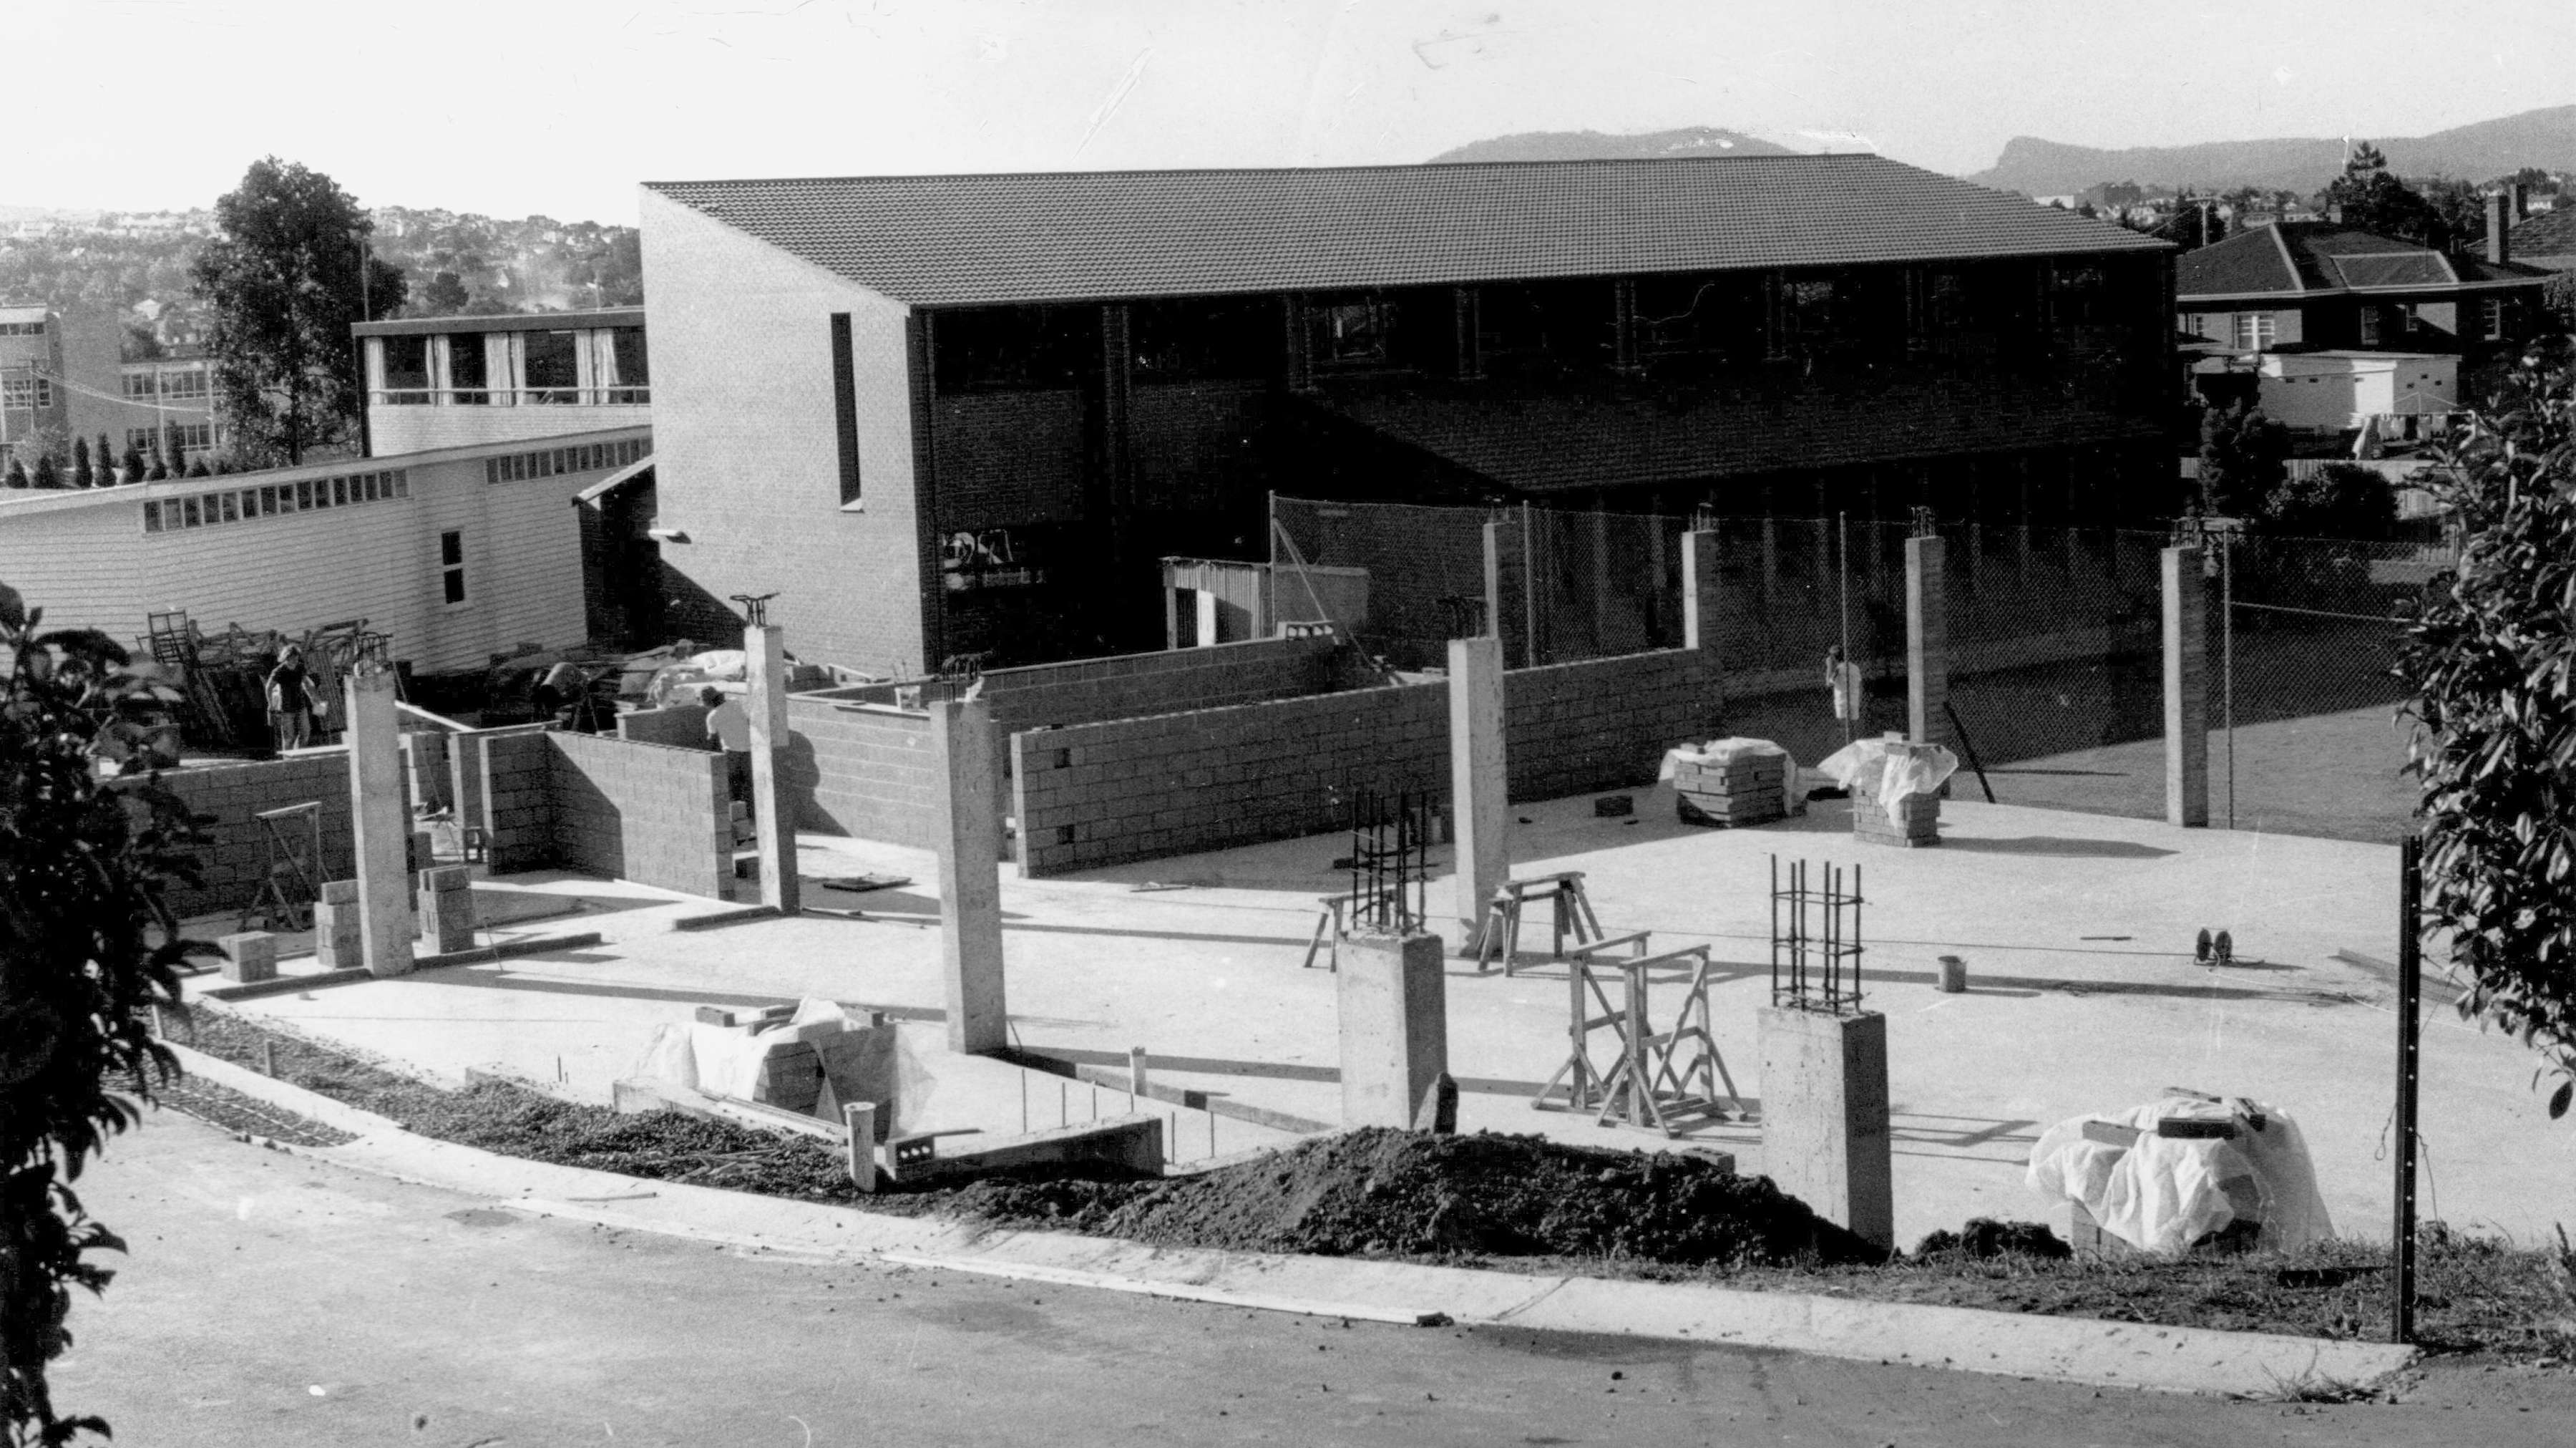 Construction of Auditorium and Middle School, 1980.